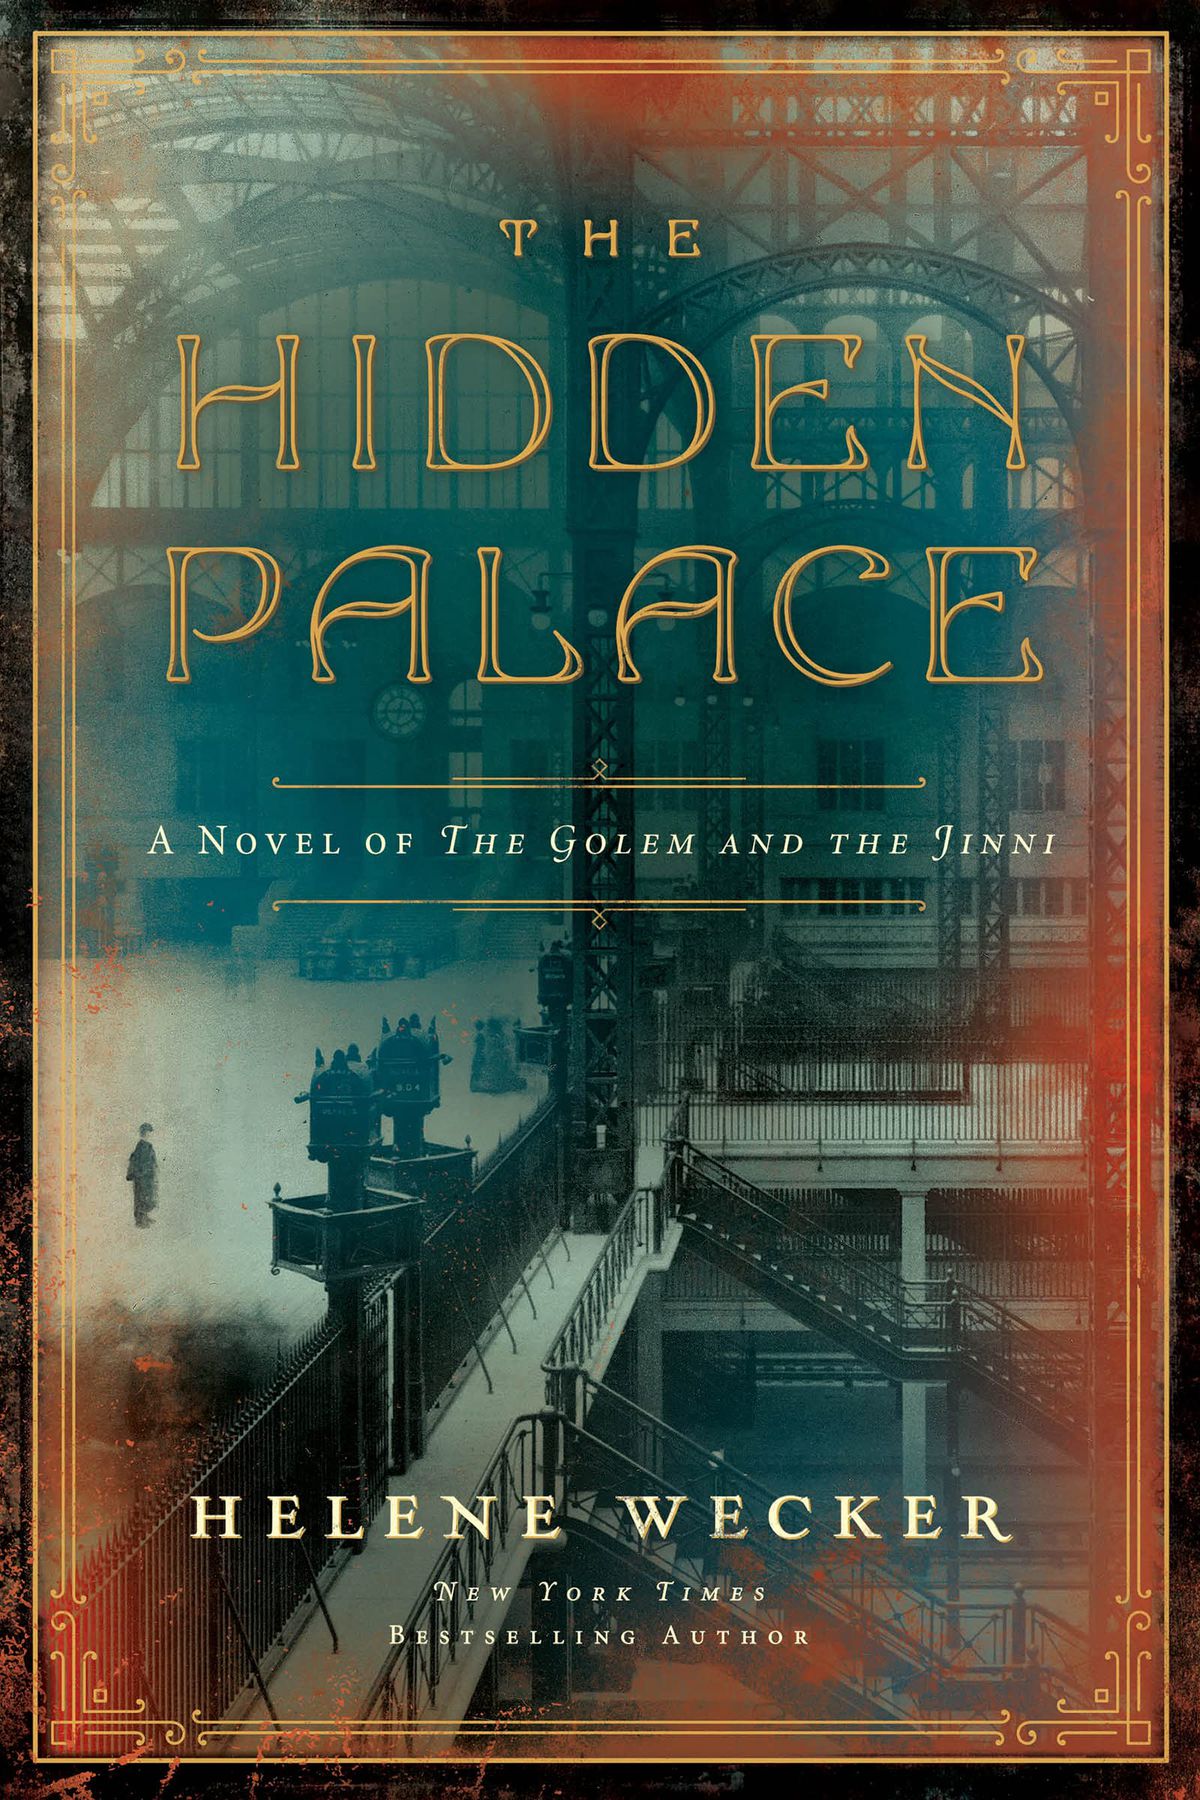 The cover of “The Hidden Palace” by Helene Wecker showing an old train station